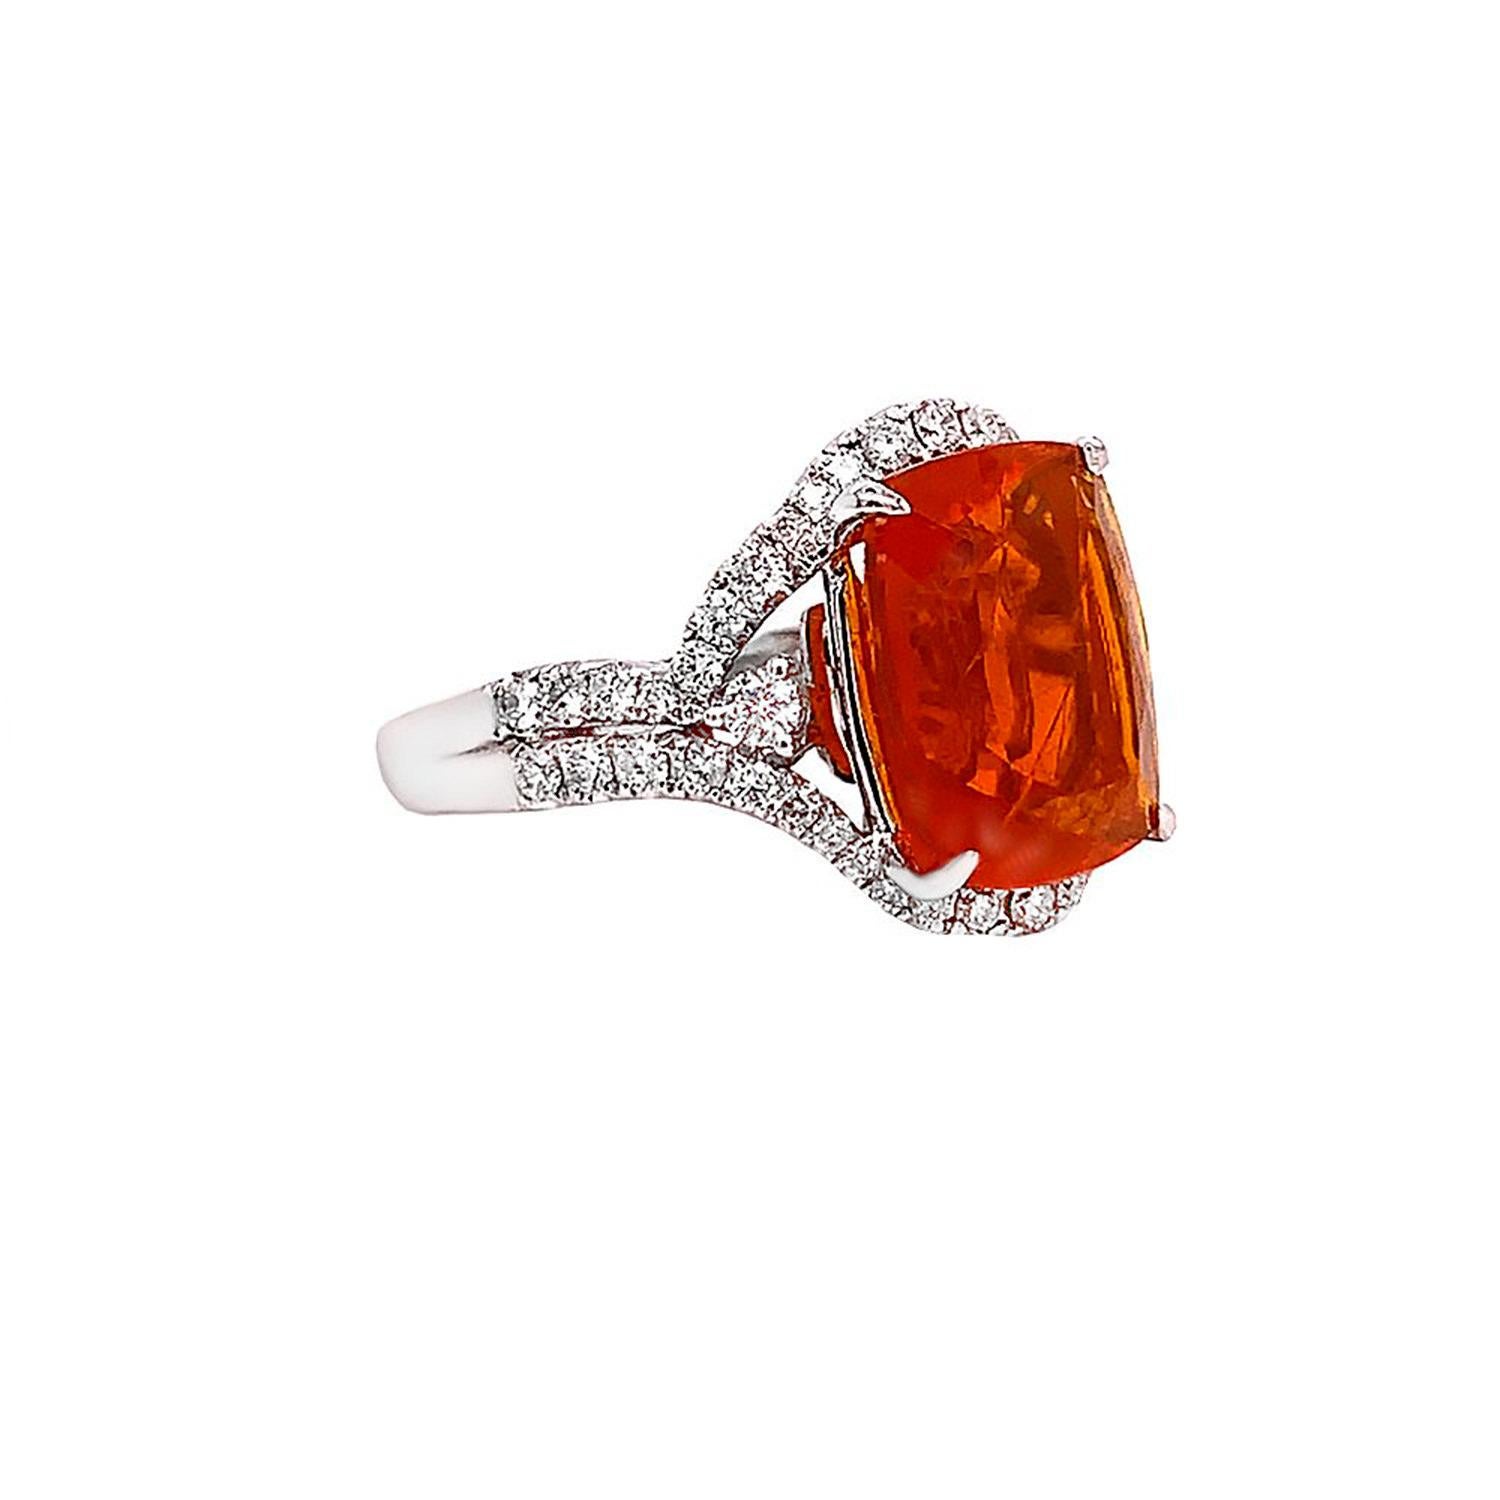 Radiant Cut Fire Opal Ring With Diamonds 5.48 Carats 14K White Gold For Sale